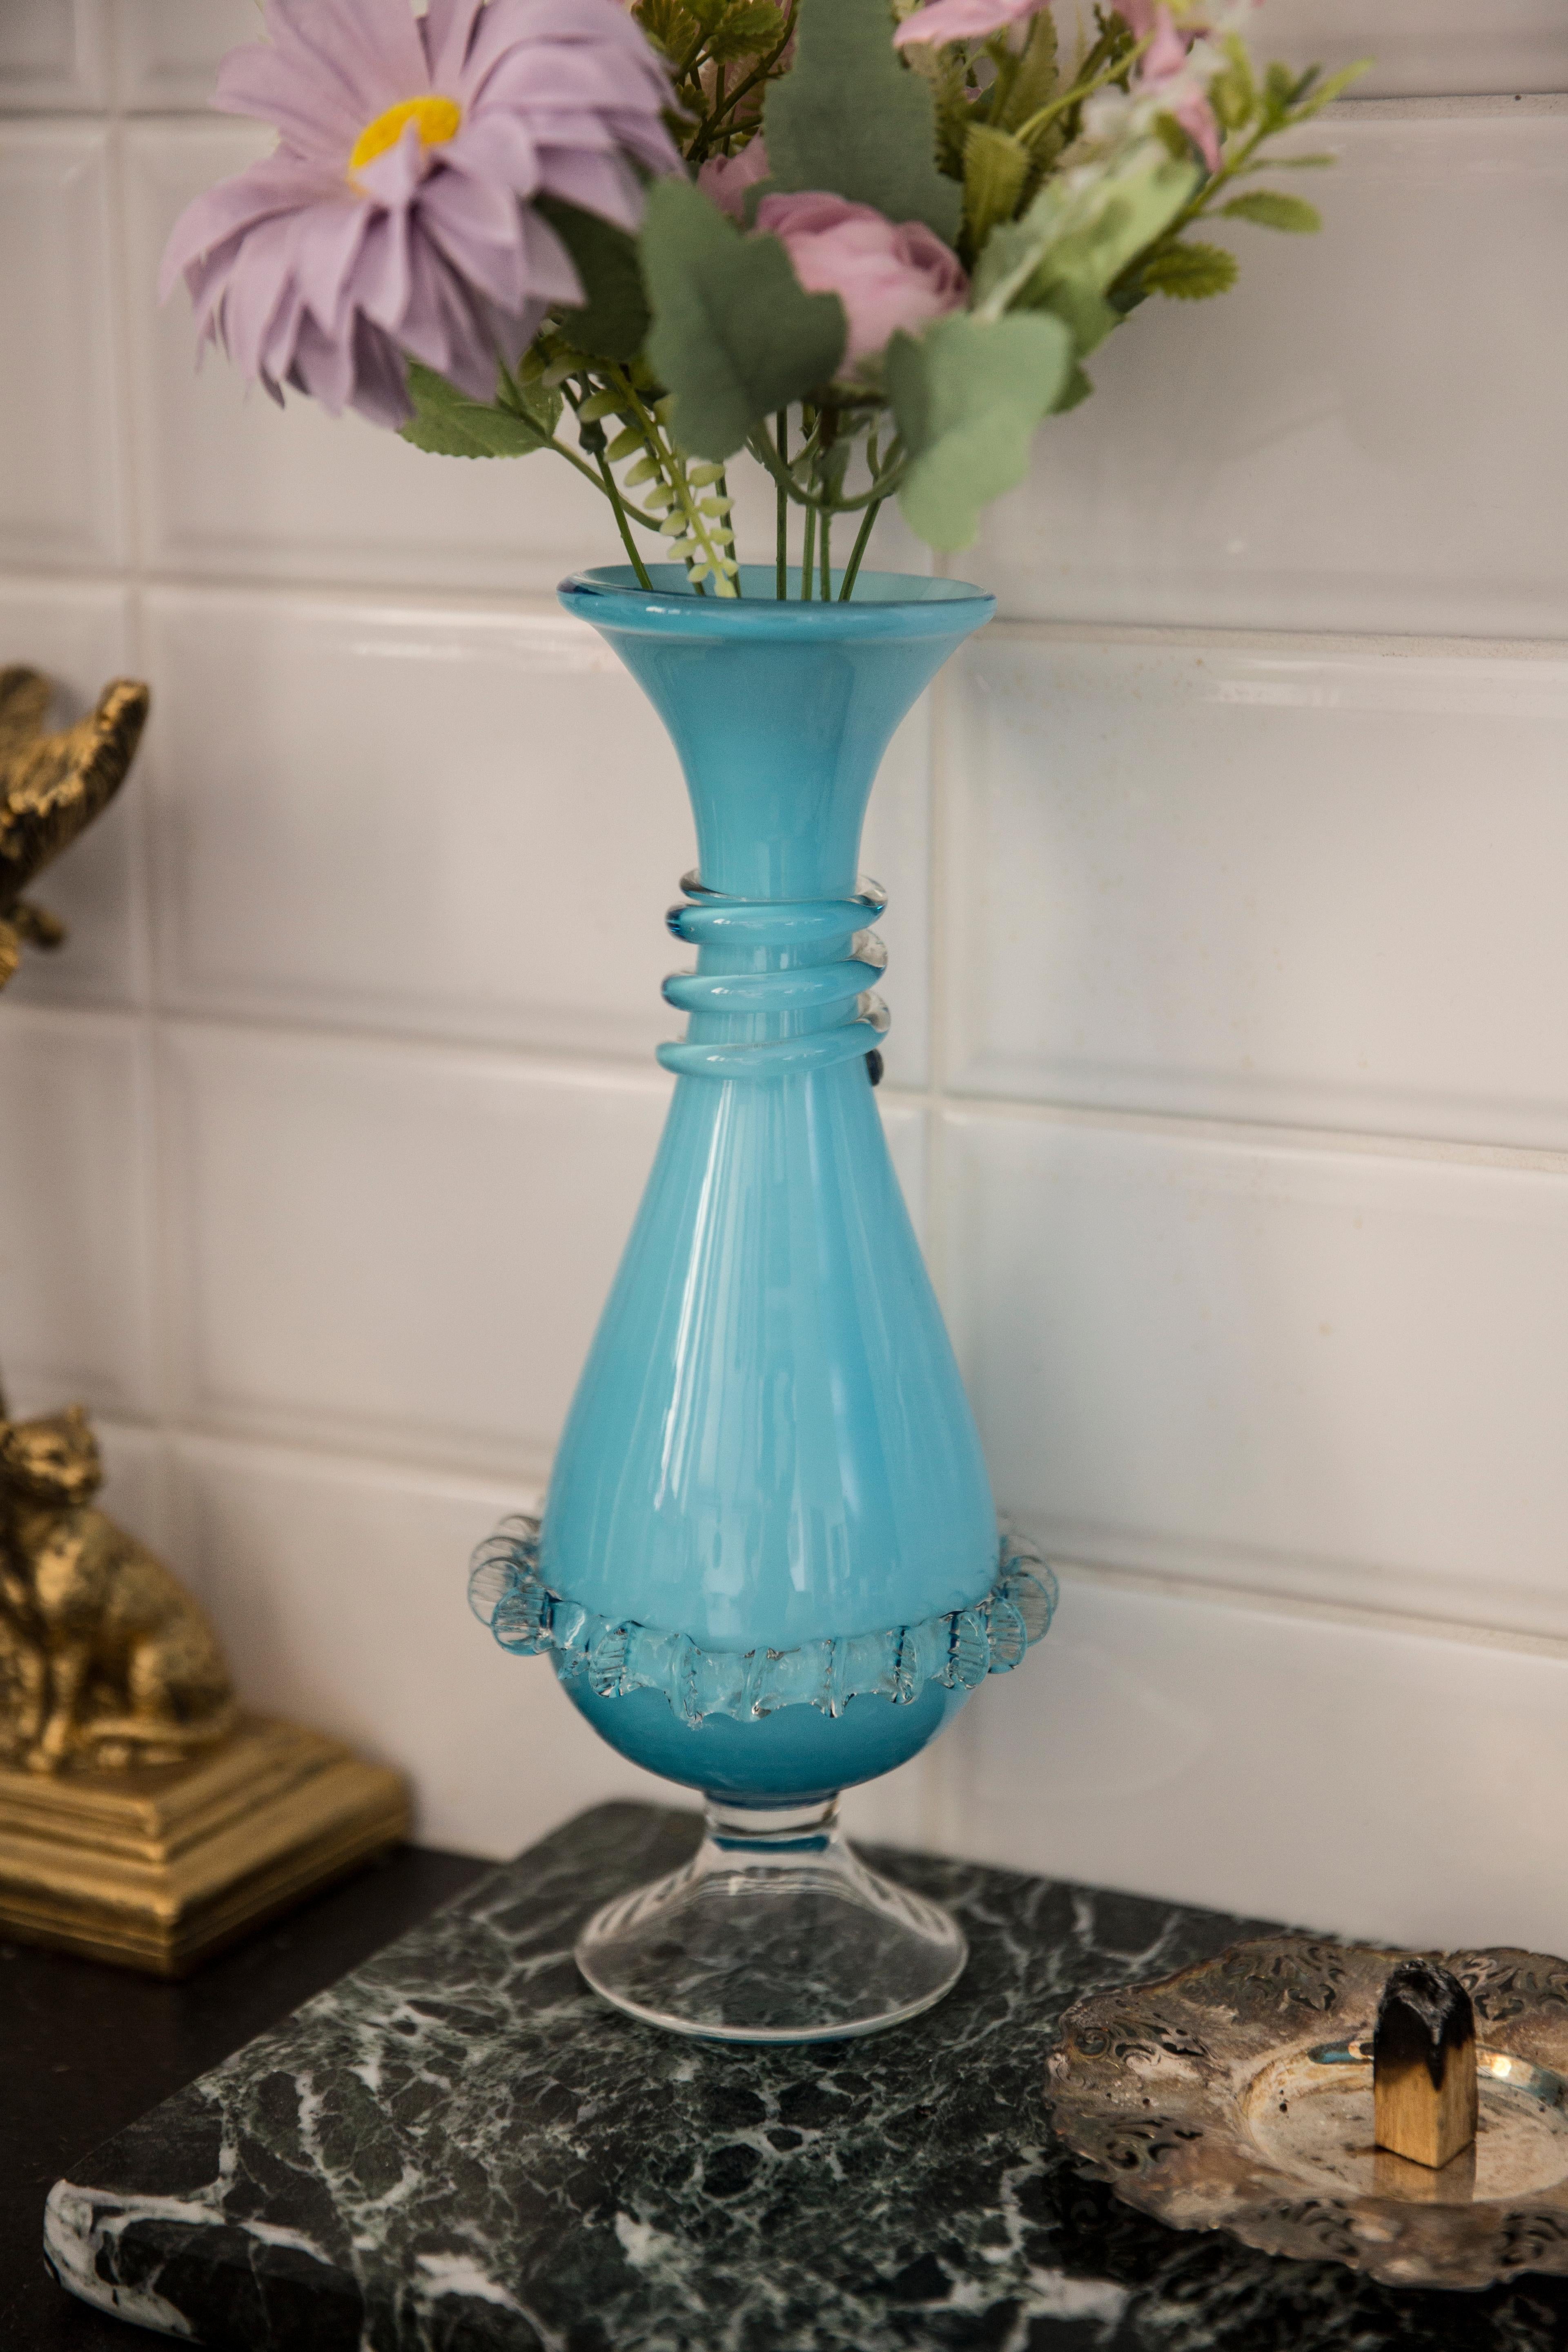 Blue vase in amazing organic shape. Produced in 1960s.
Glass in perfect condition. The vase looks like it has just been taken out of the box.

No jags, defects etc. The outer relief surface, the inner smooth. Thick glass vase, massive.

The